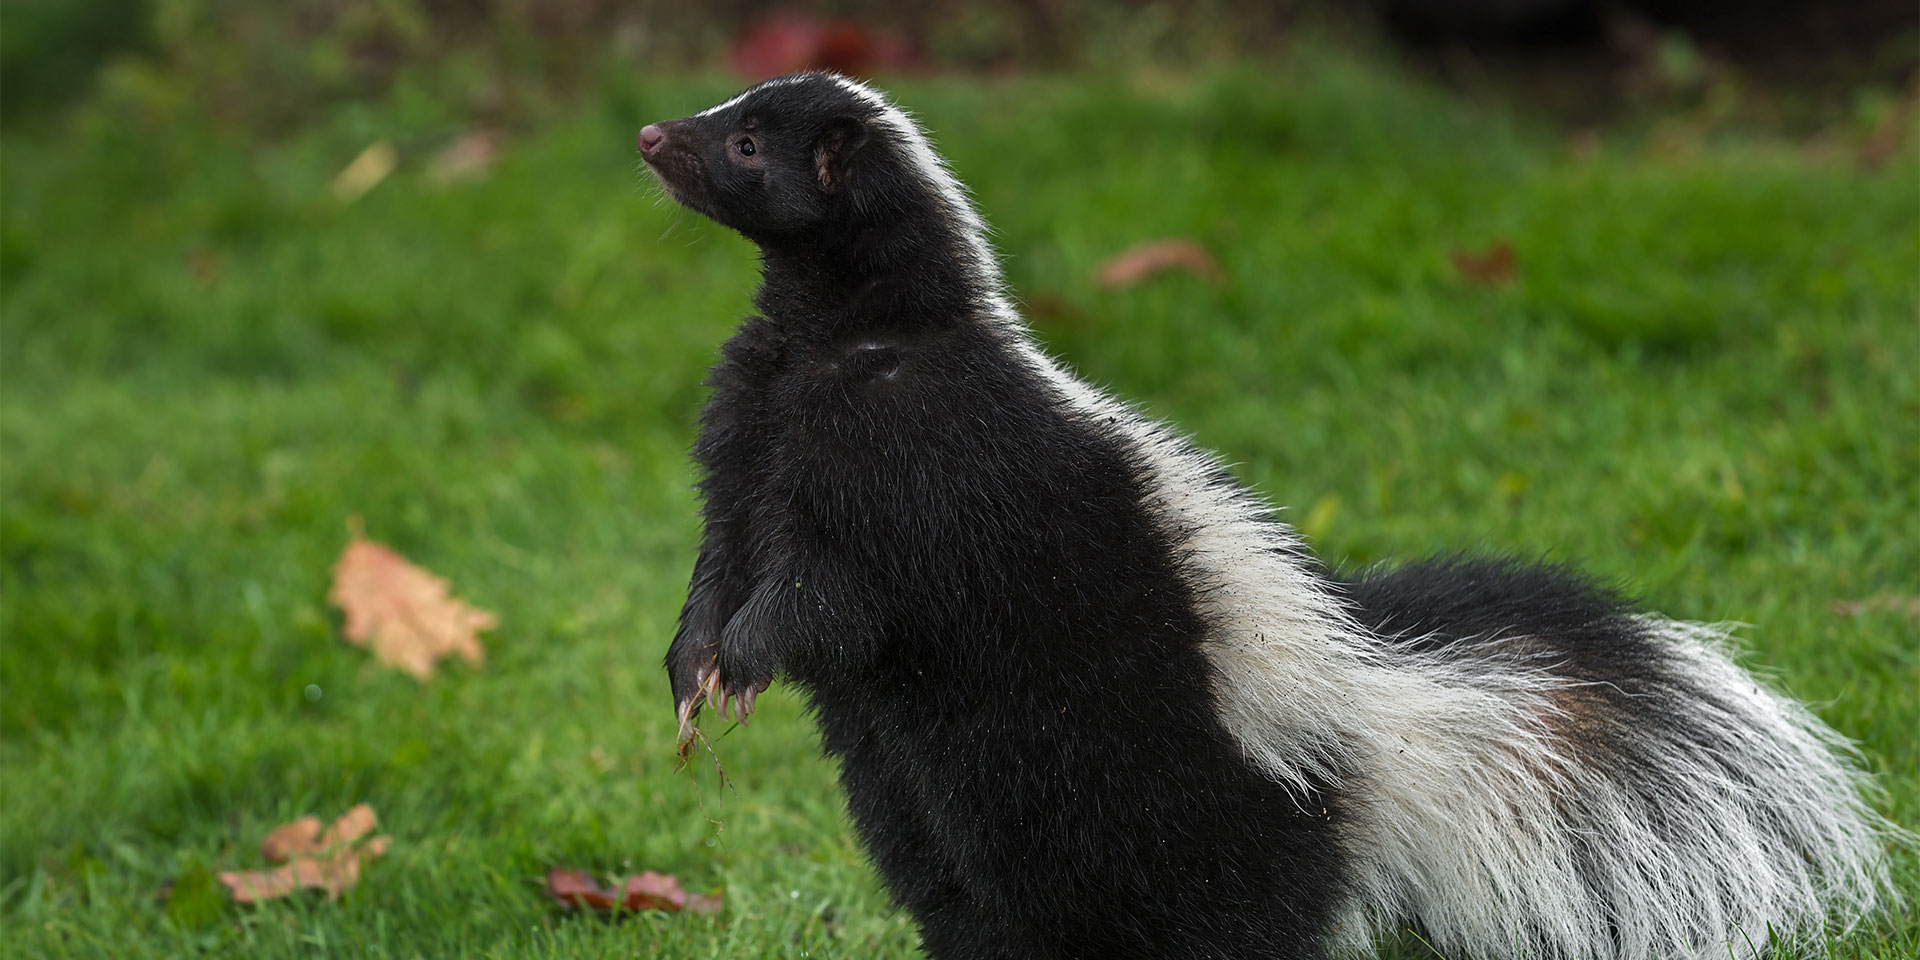 Skunk standing up on grass